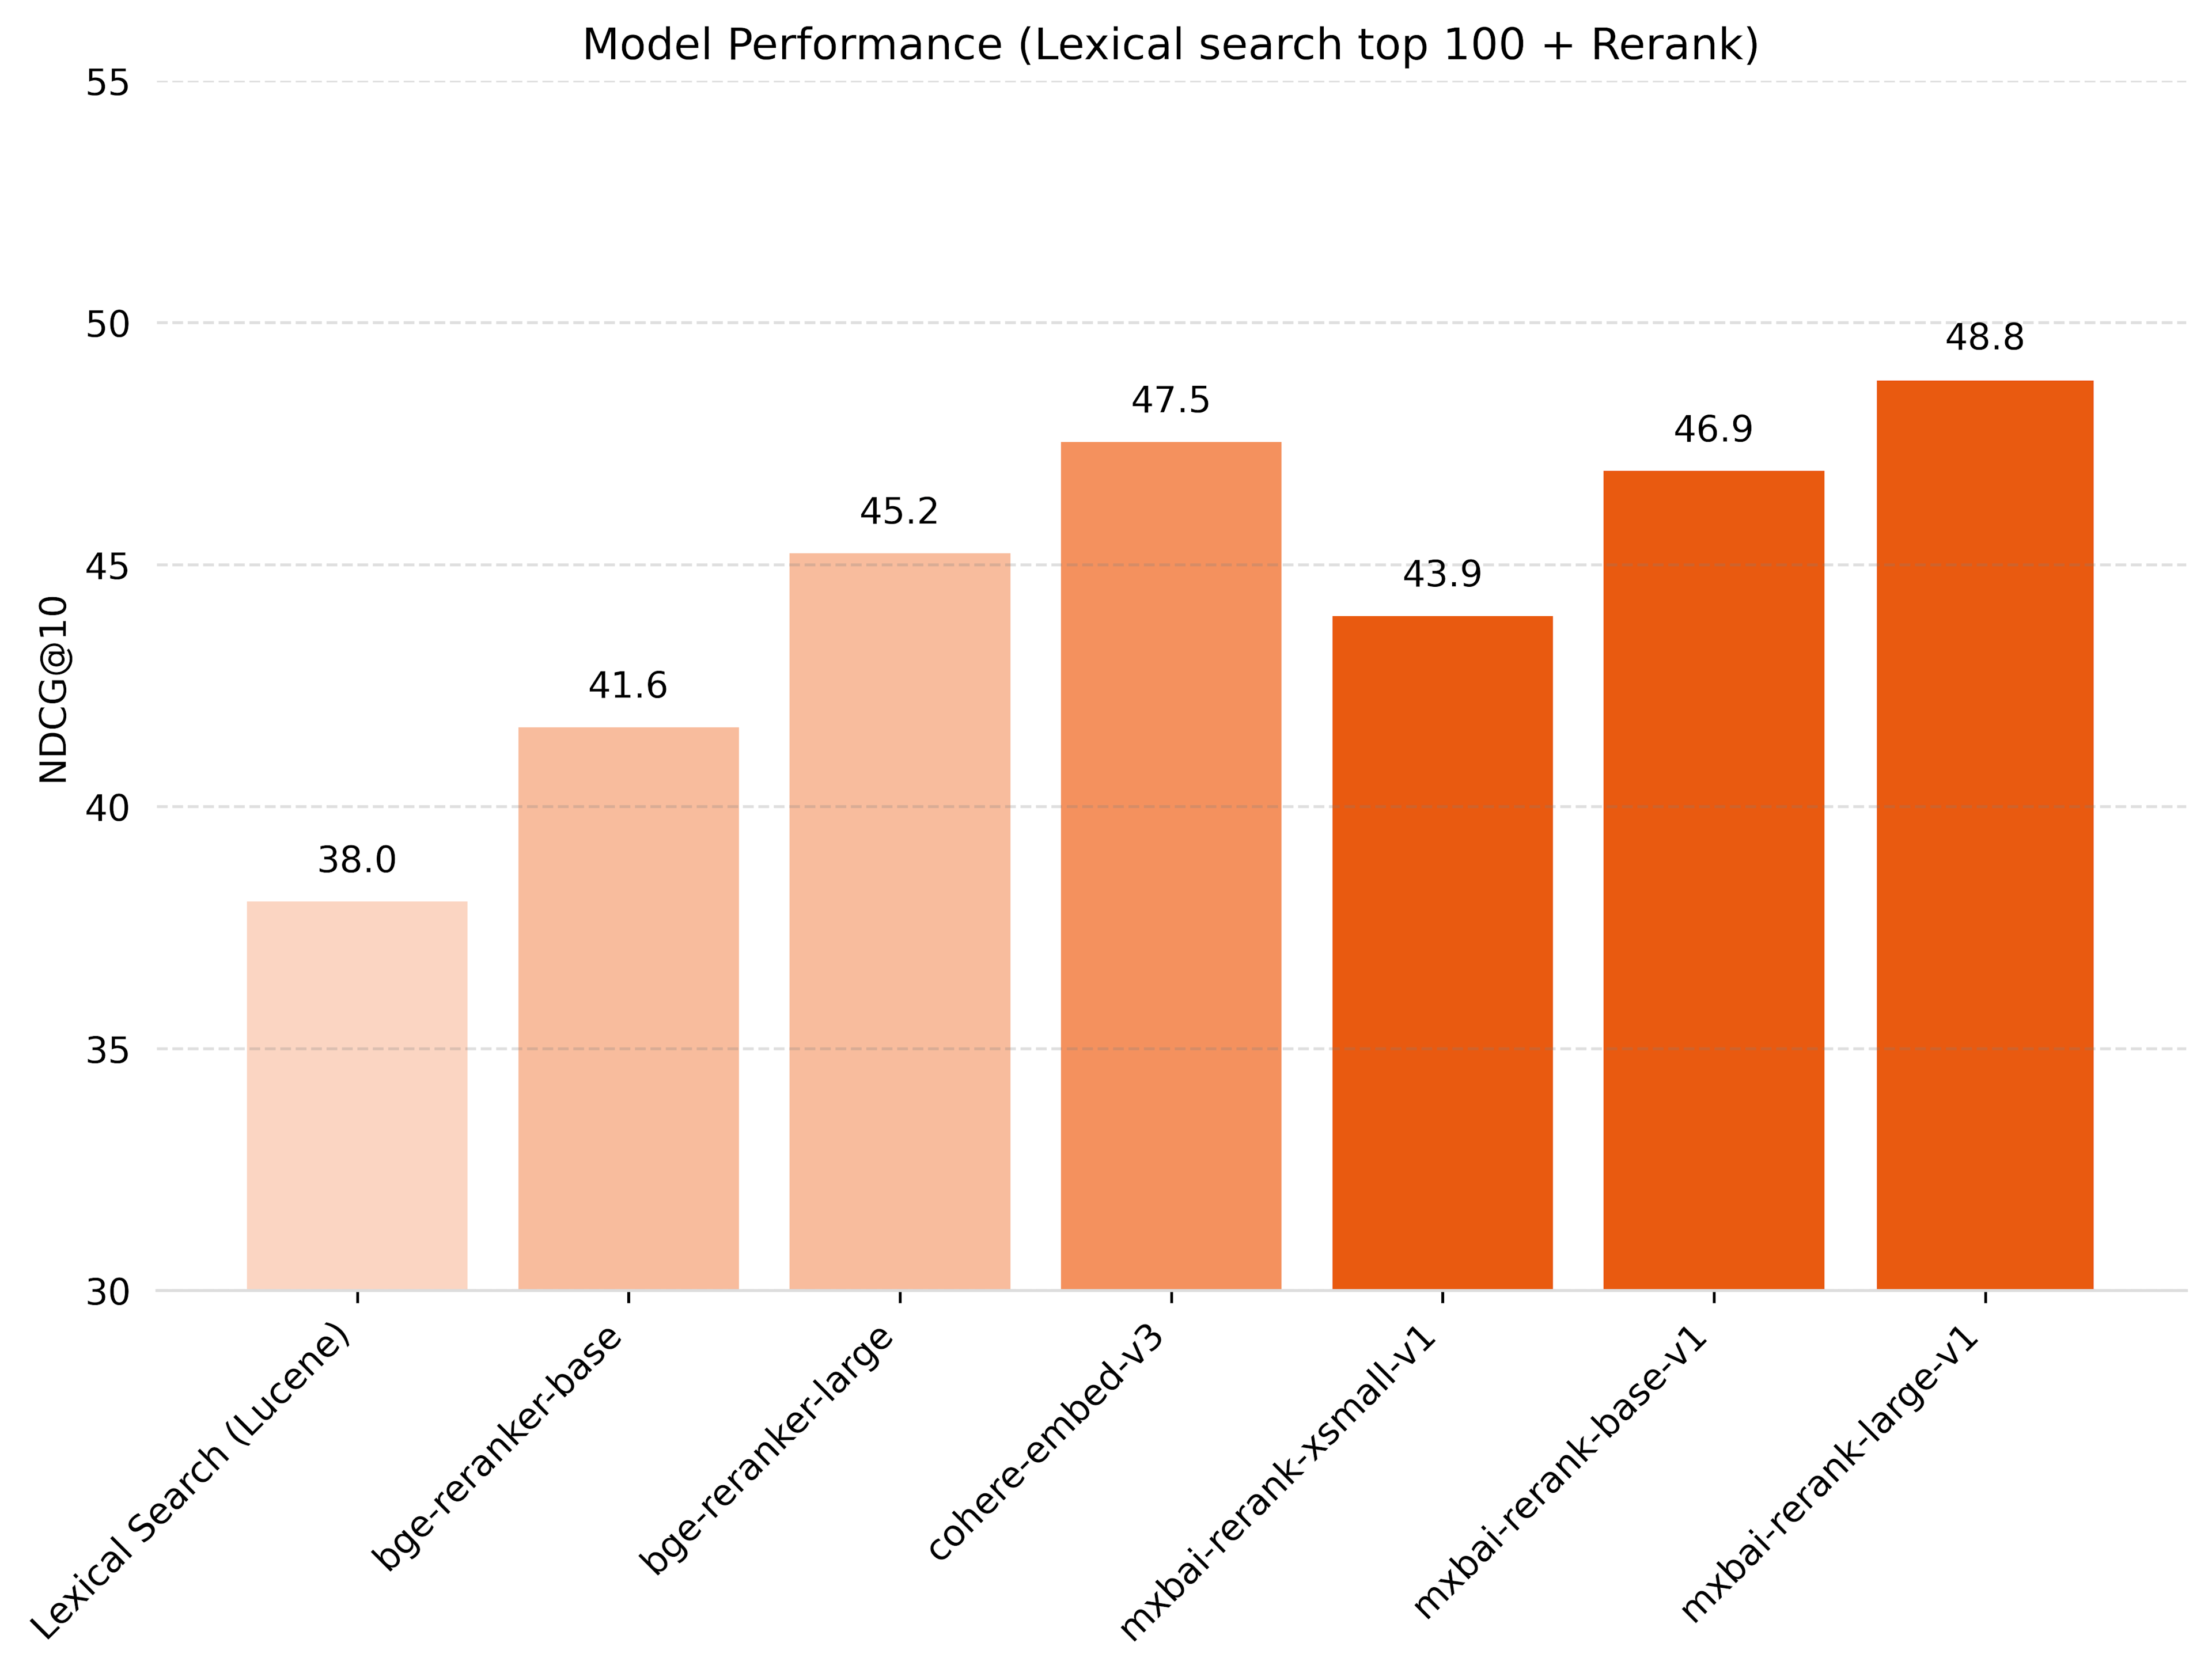 Comparison of overall relevance scores between the Mixedbread rerank family and other models